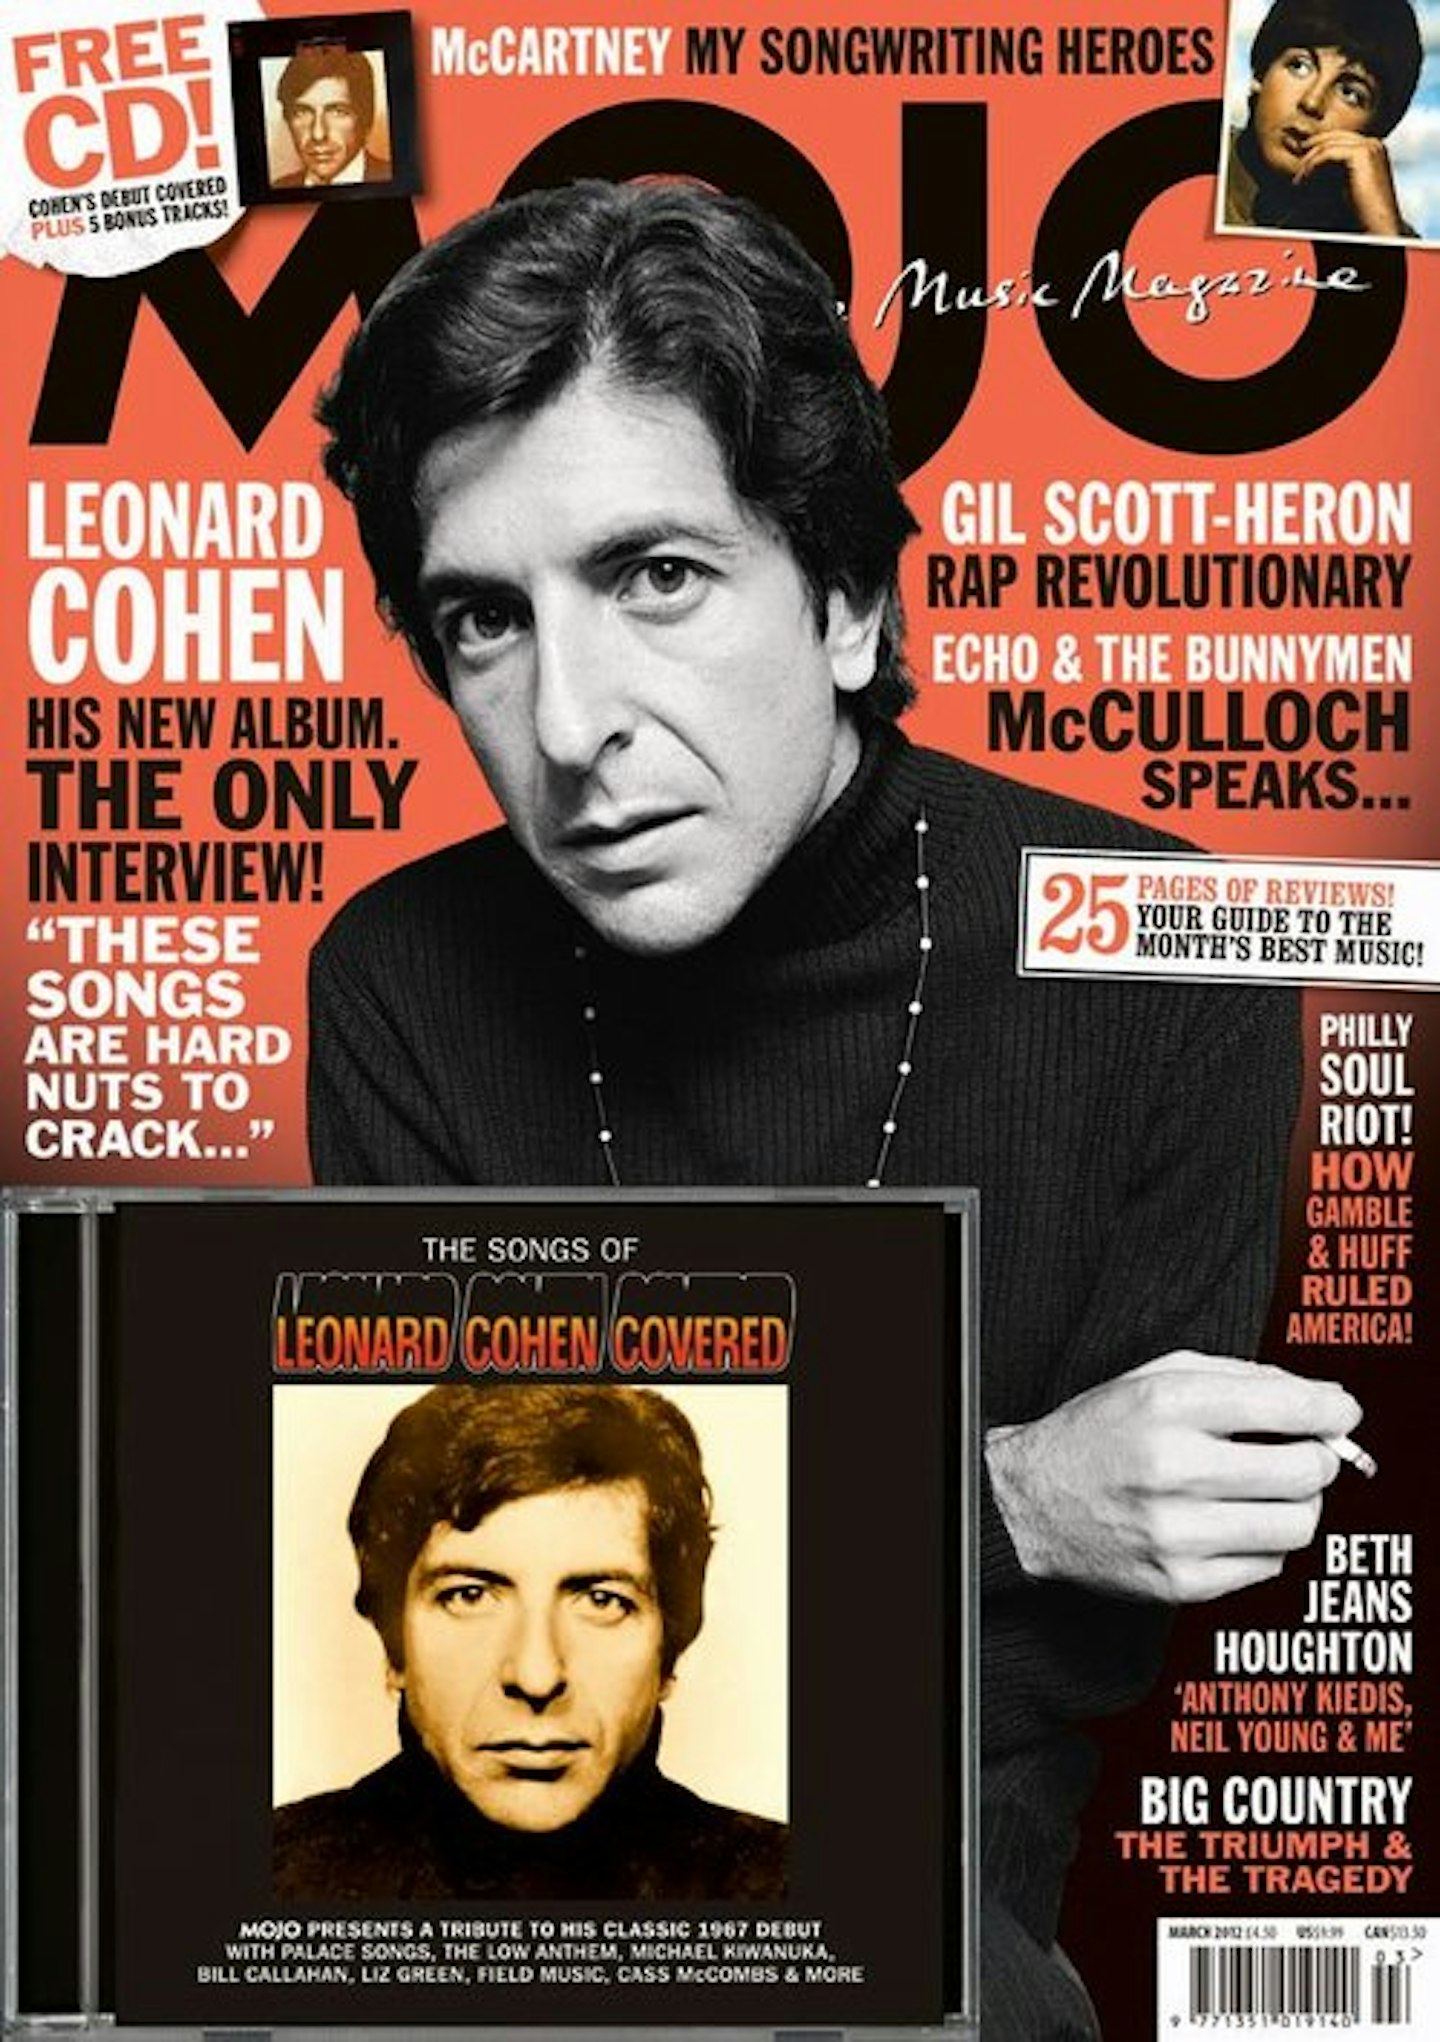 MOJO Issue 220 / March 2012